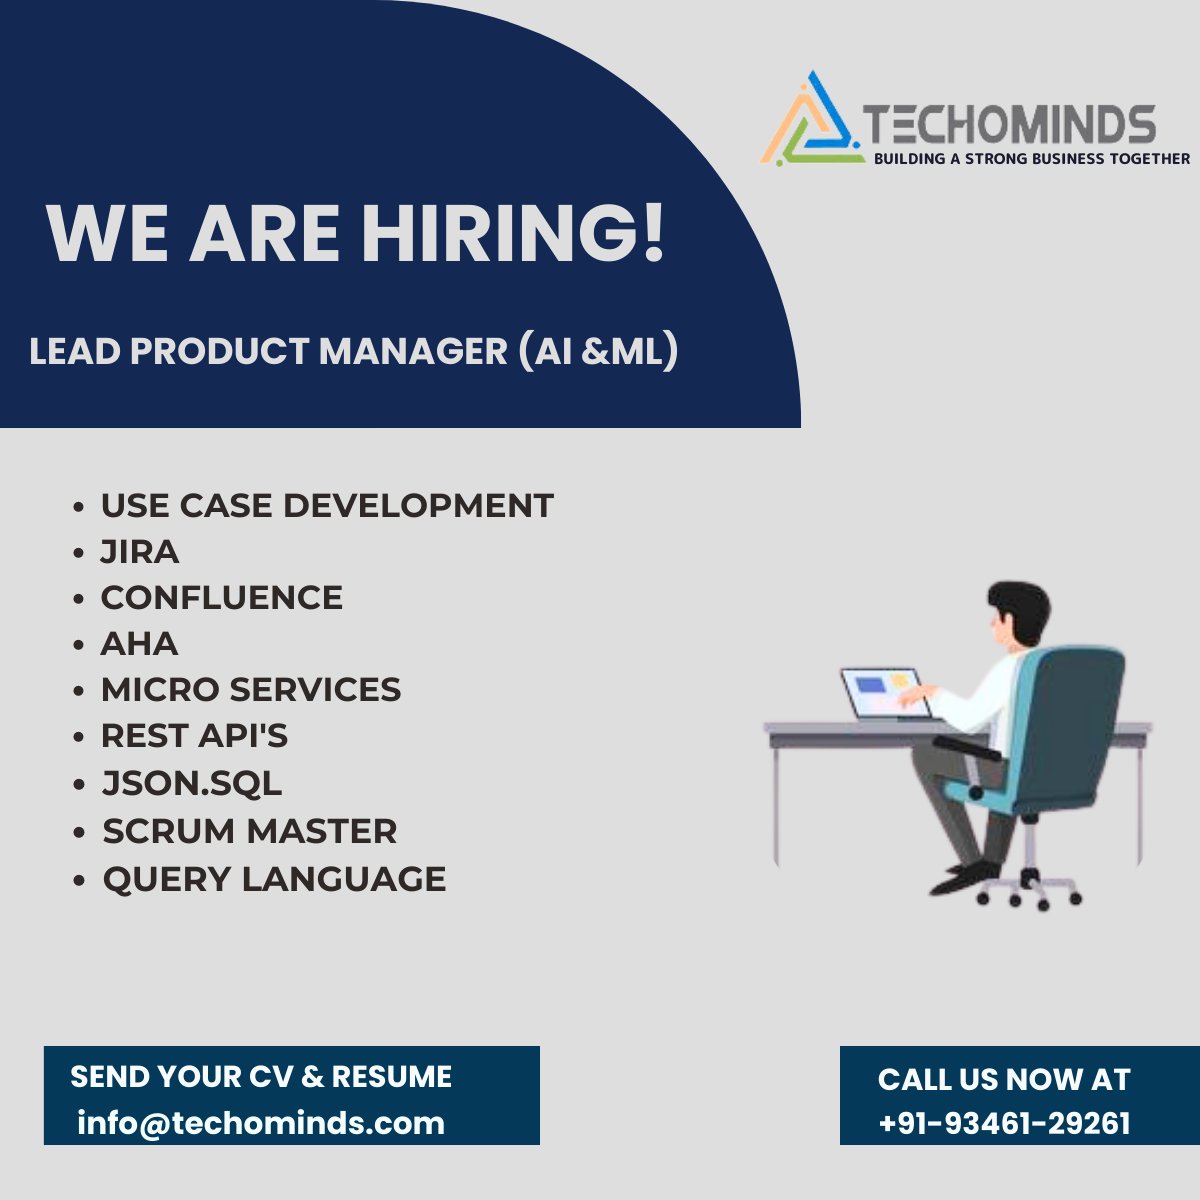 We are Hiring Lead Product Manager (AI & ML)
.
.
.
#hiring #leadproductmanager #usecase #jira #confluece #aha #microservices #restapi #jsonsql #scrummaster #querylanguage